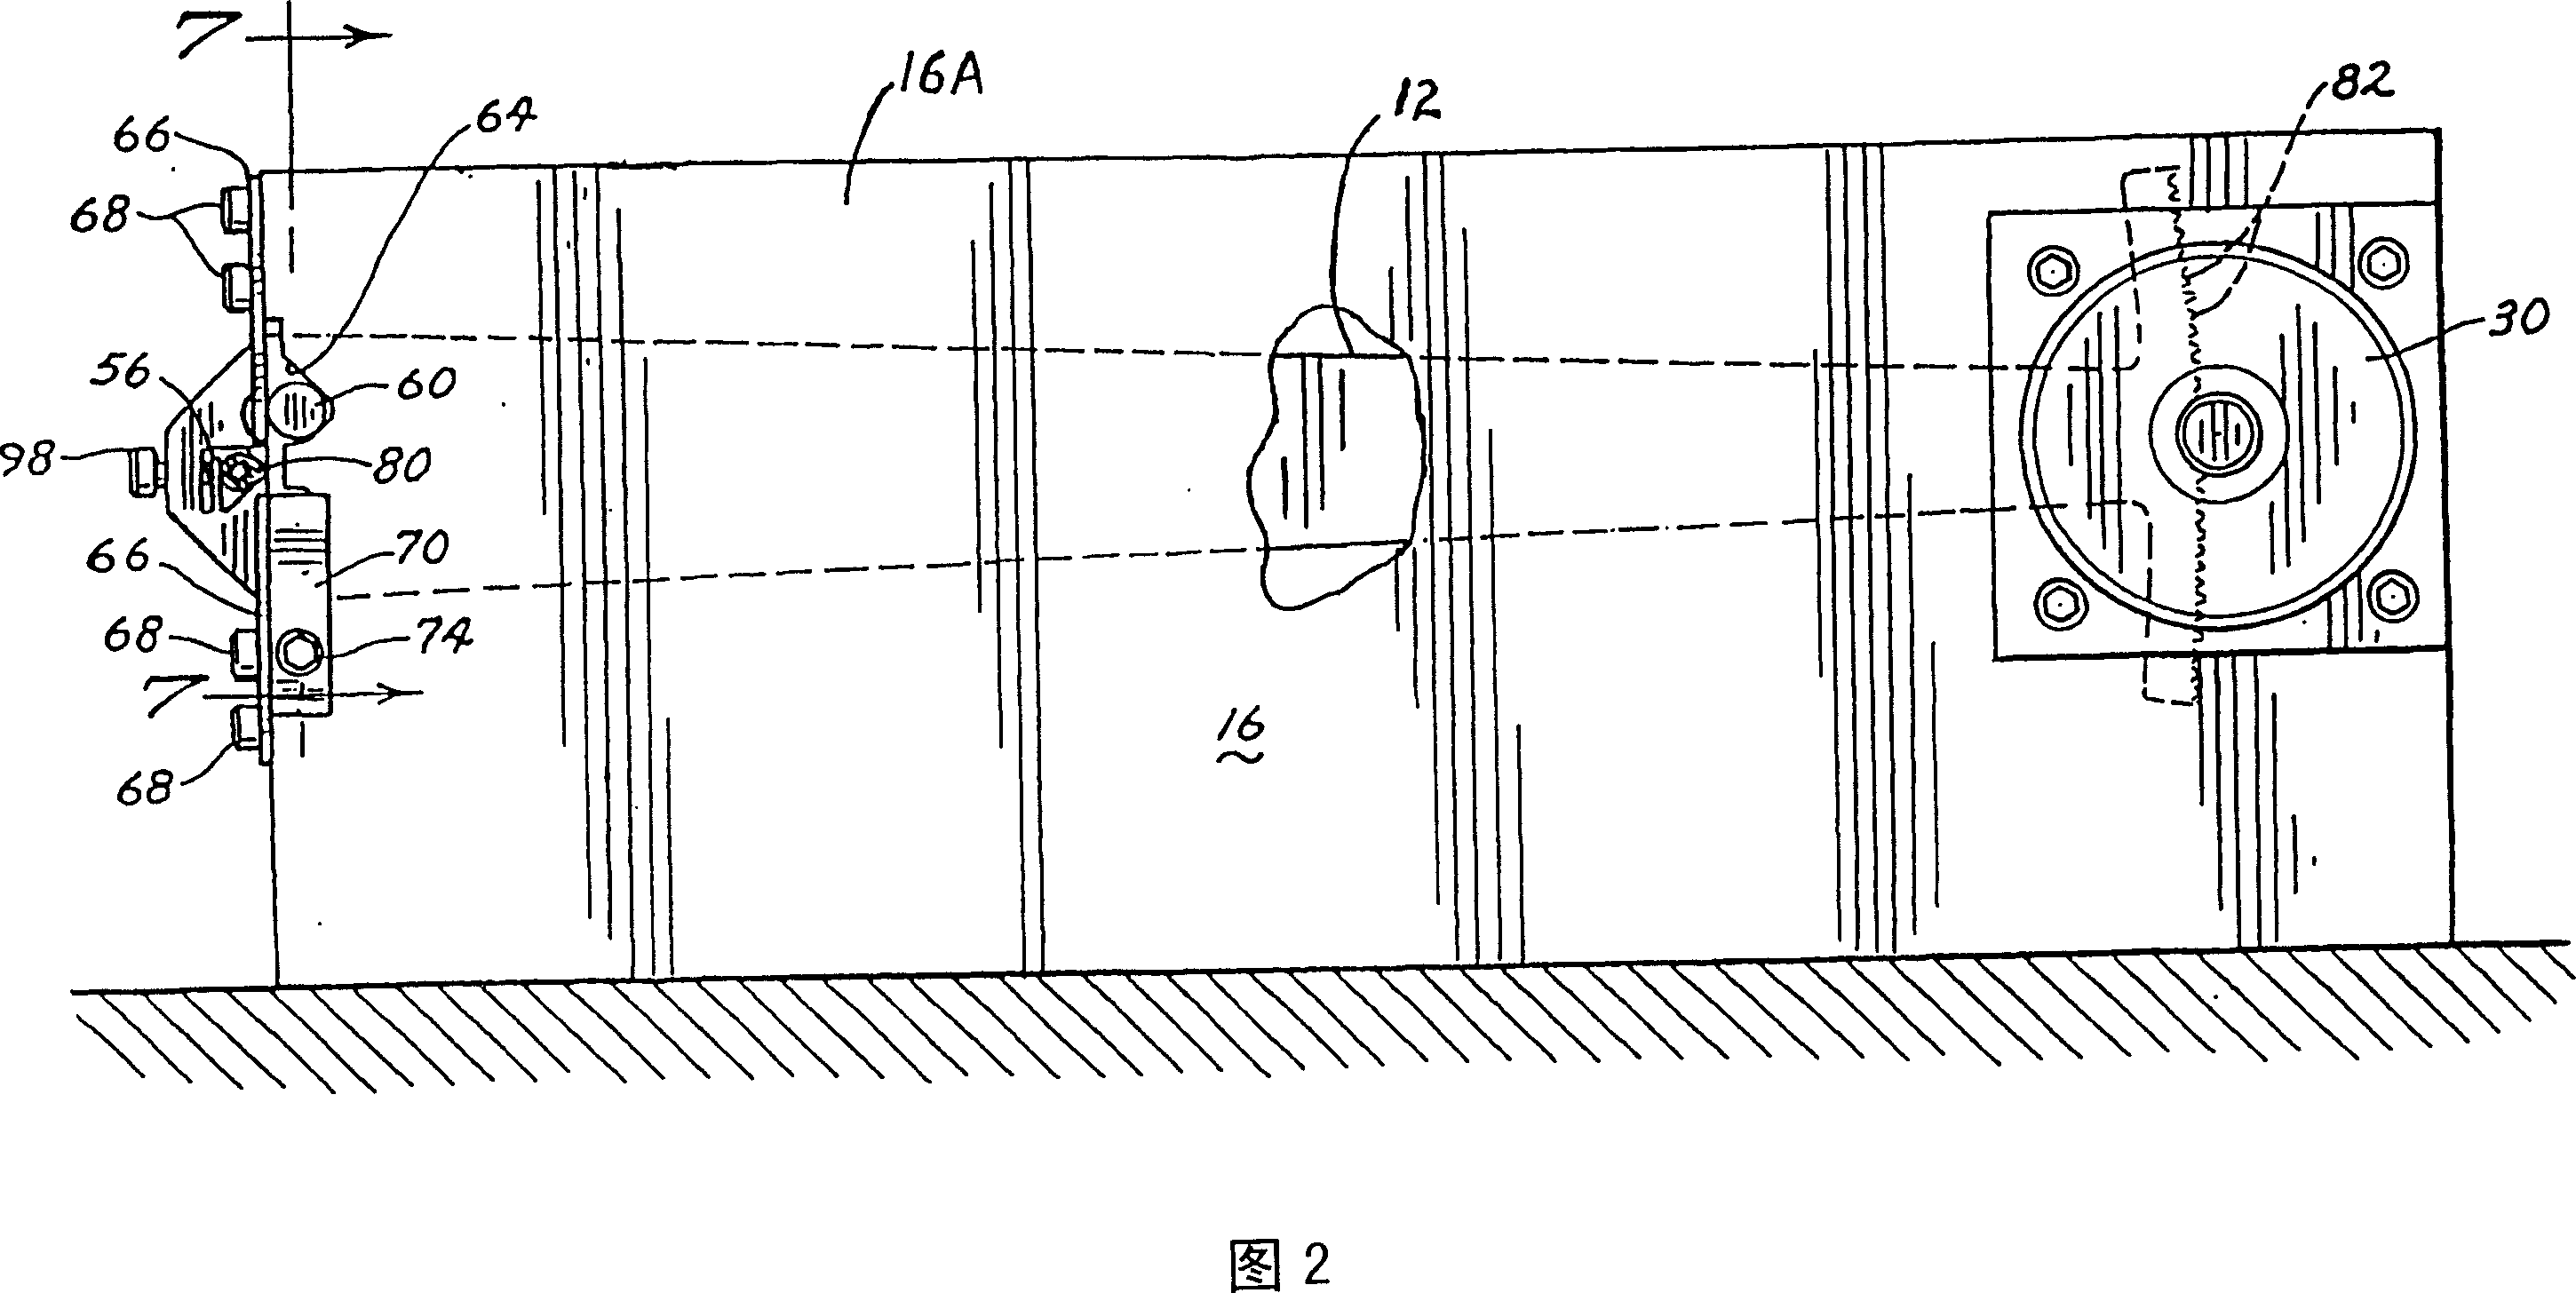 Two beam optical switch and attenuator and method of use